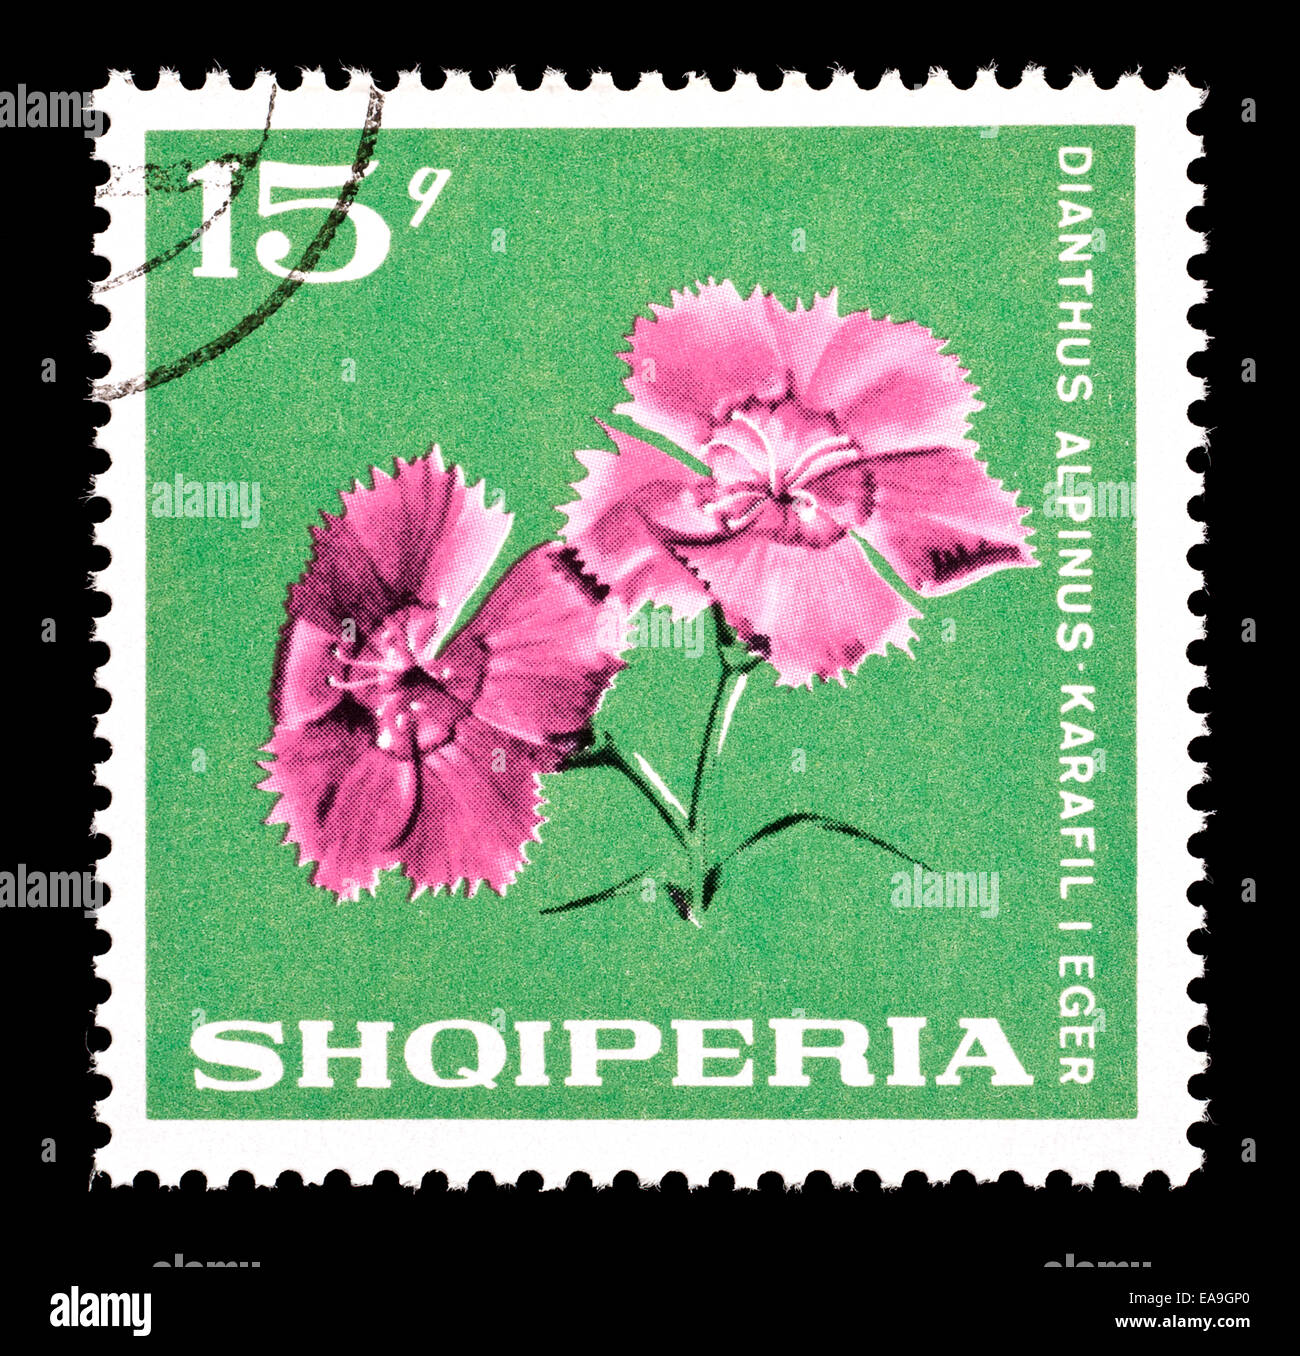 Postage stamp from Albania depicting Alpine pink or dianthus flowers (Dianthus alpinus) Stock Photo